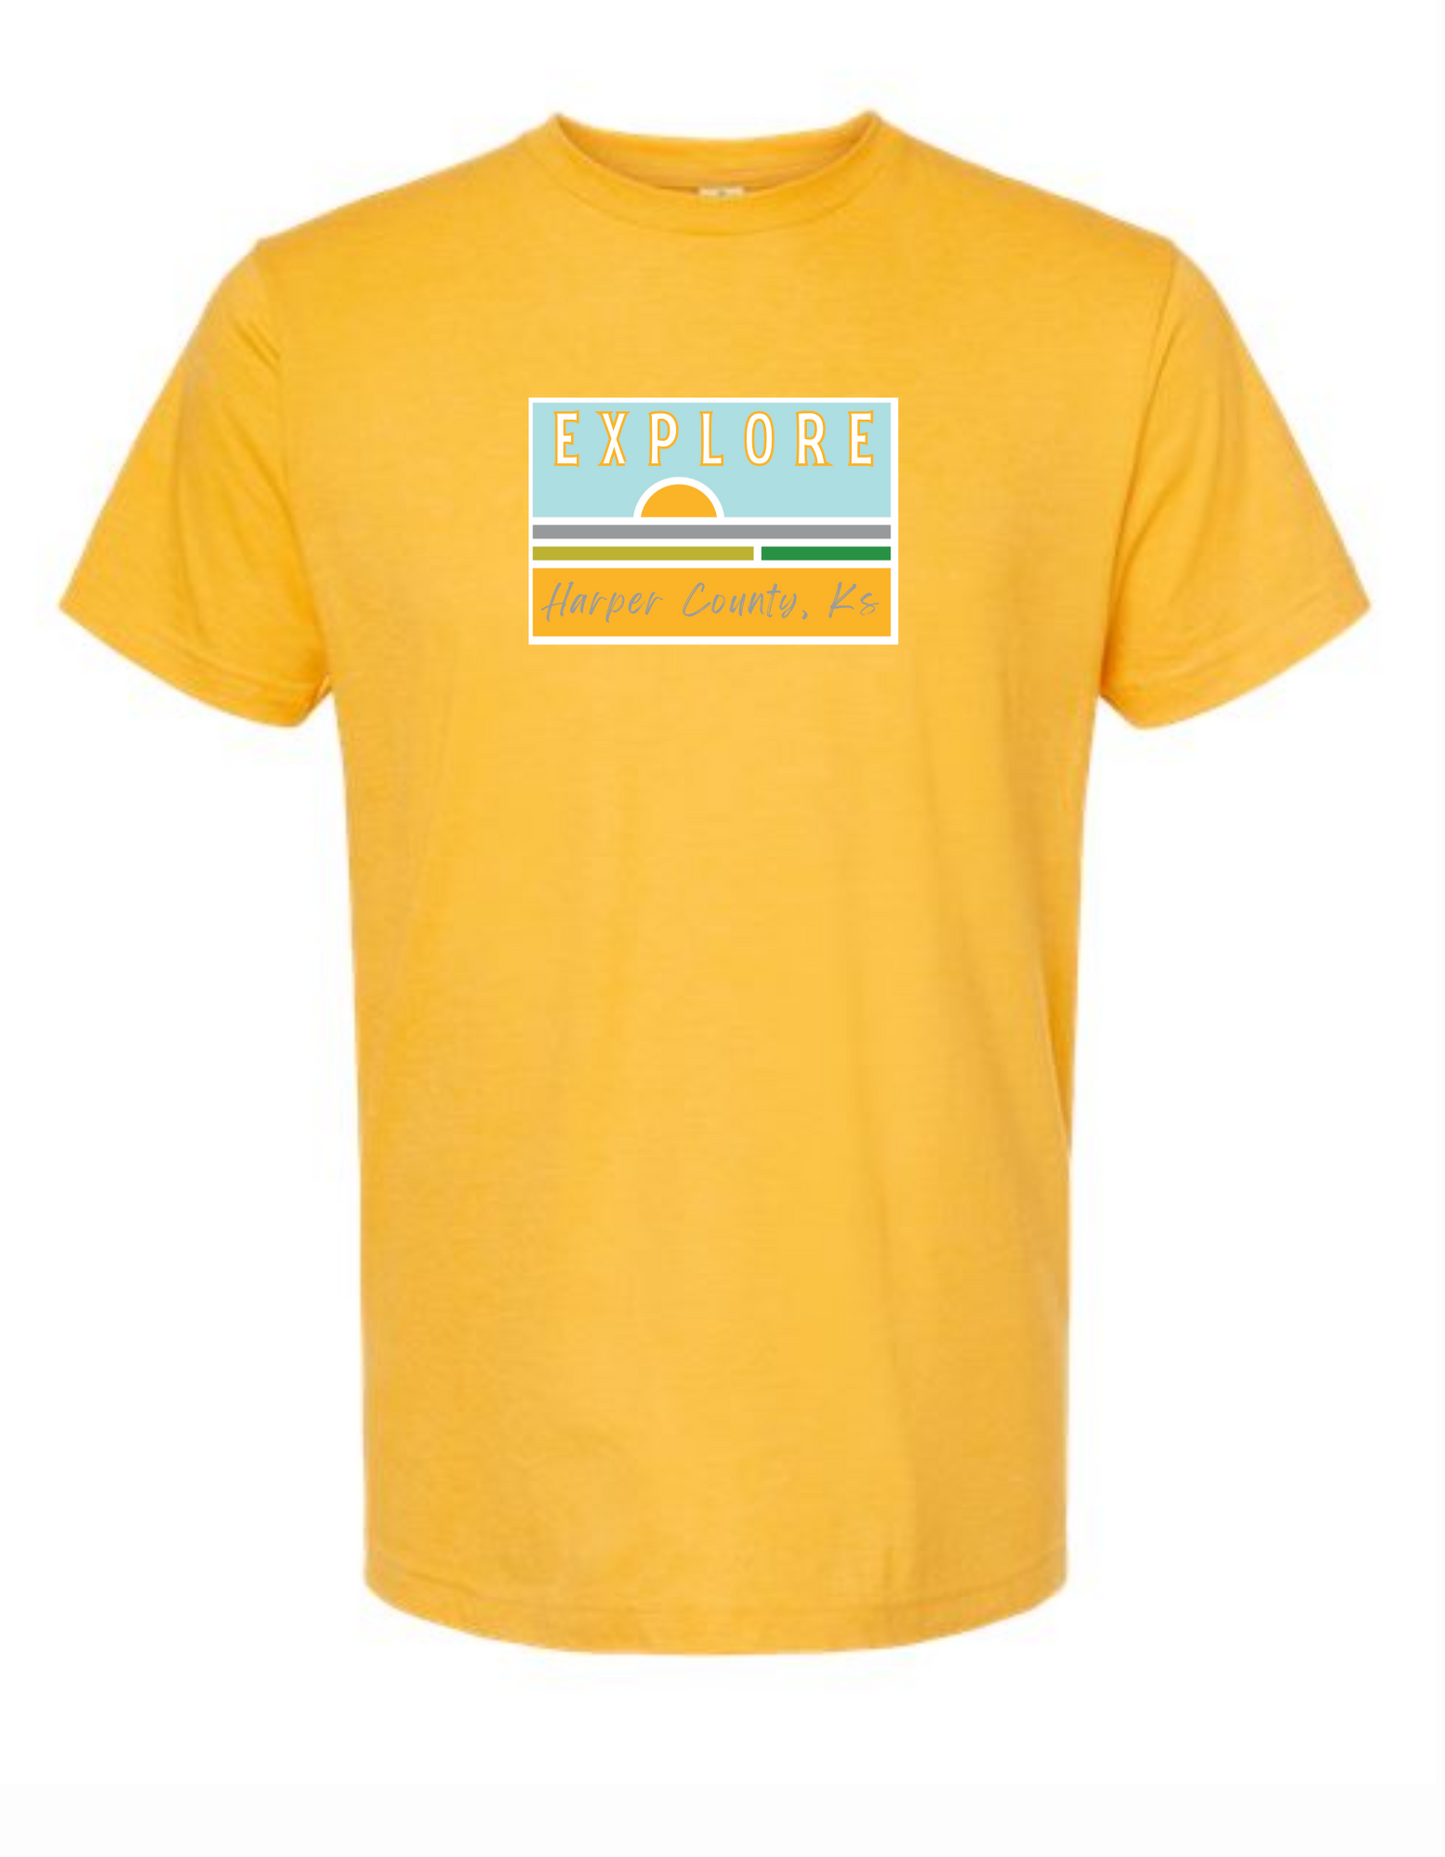 Explore Harper County, KS tee: available in multiple colors